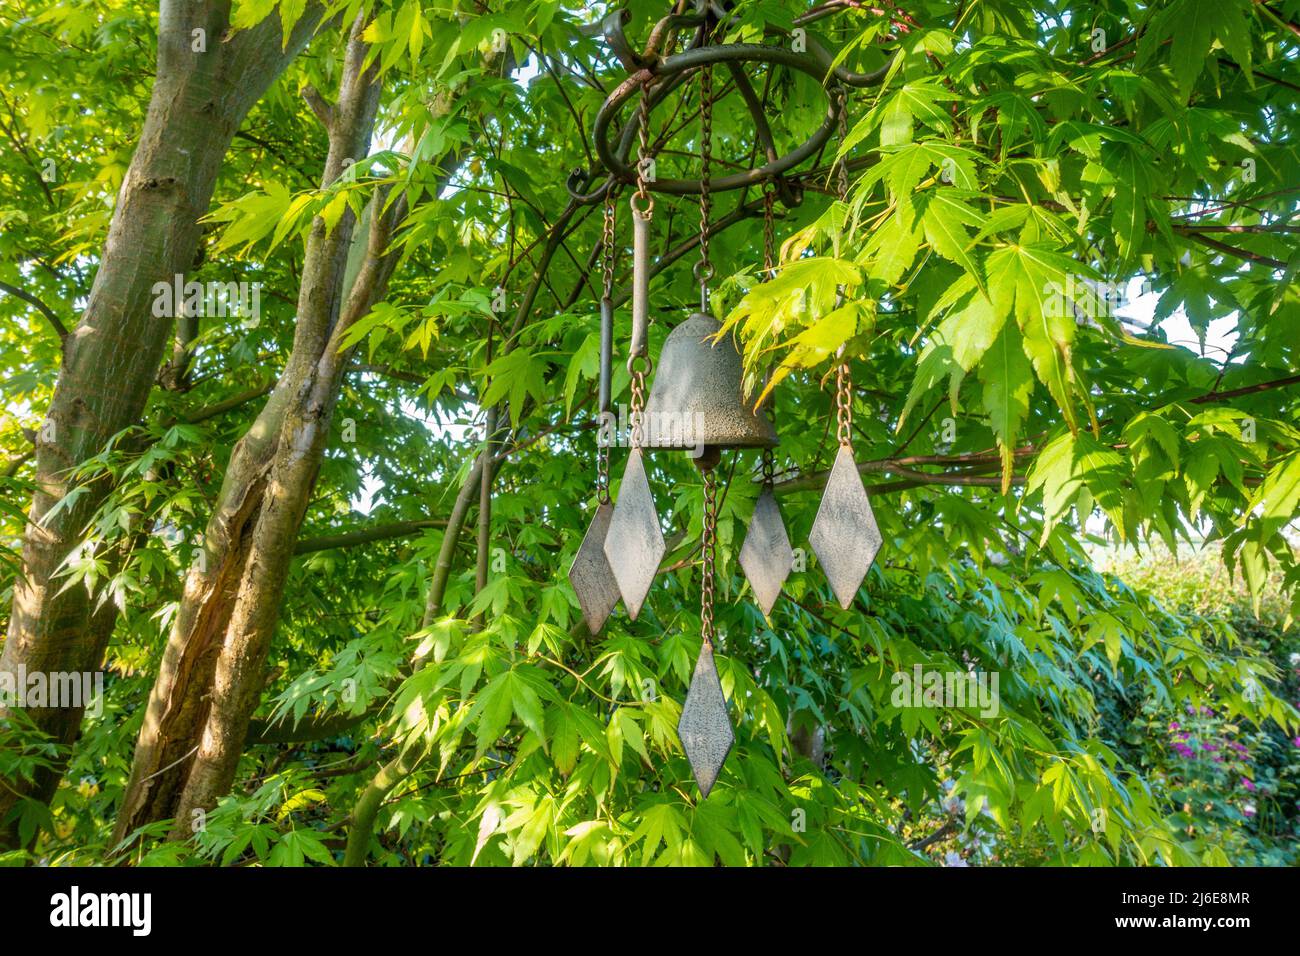 A wind chime garden ornament hanging from a Japanese maple tree in a garden Stock Photo